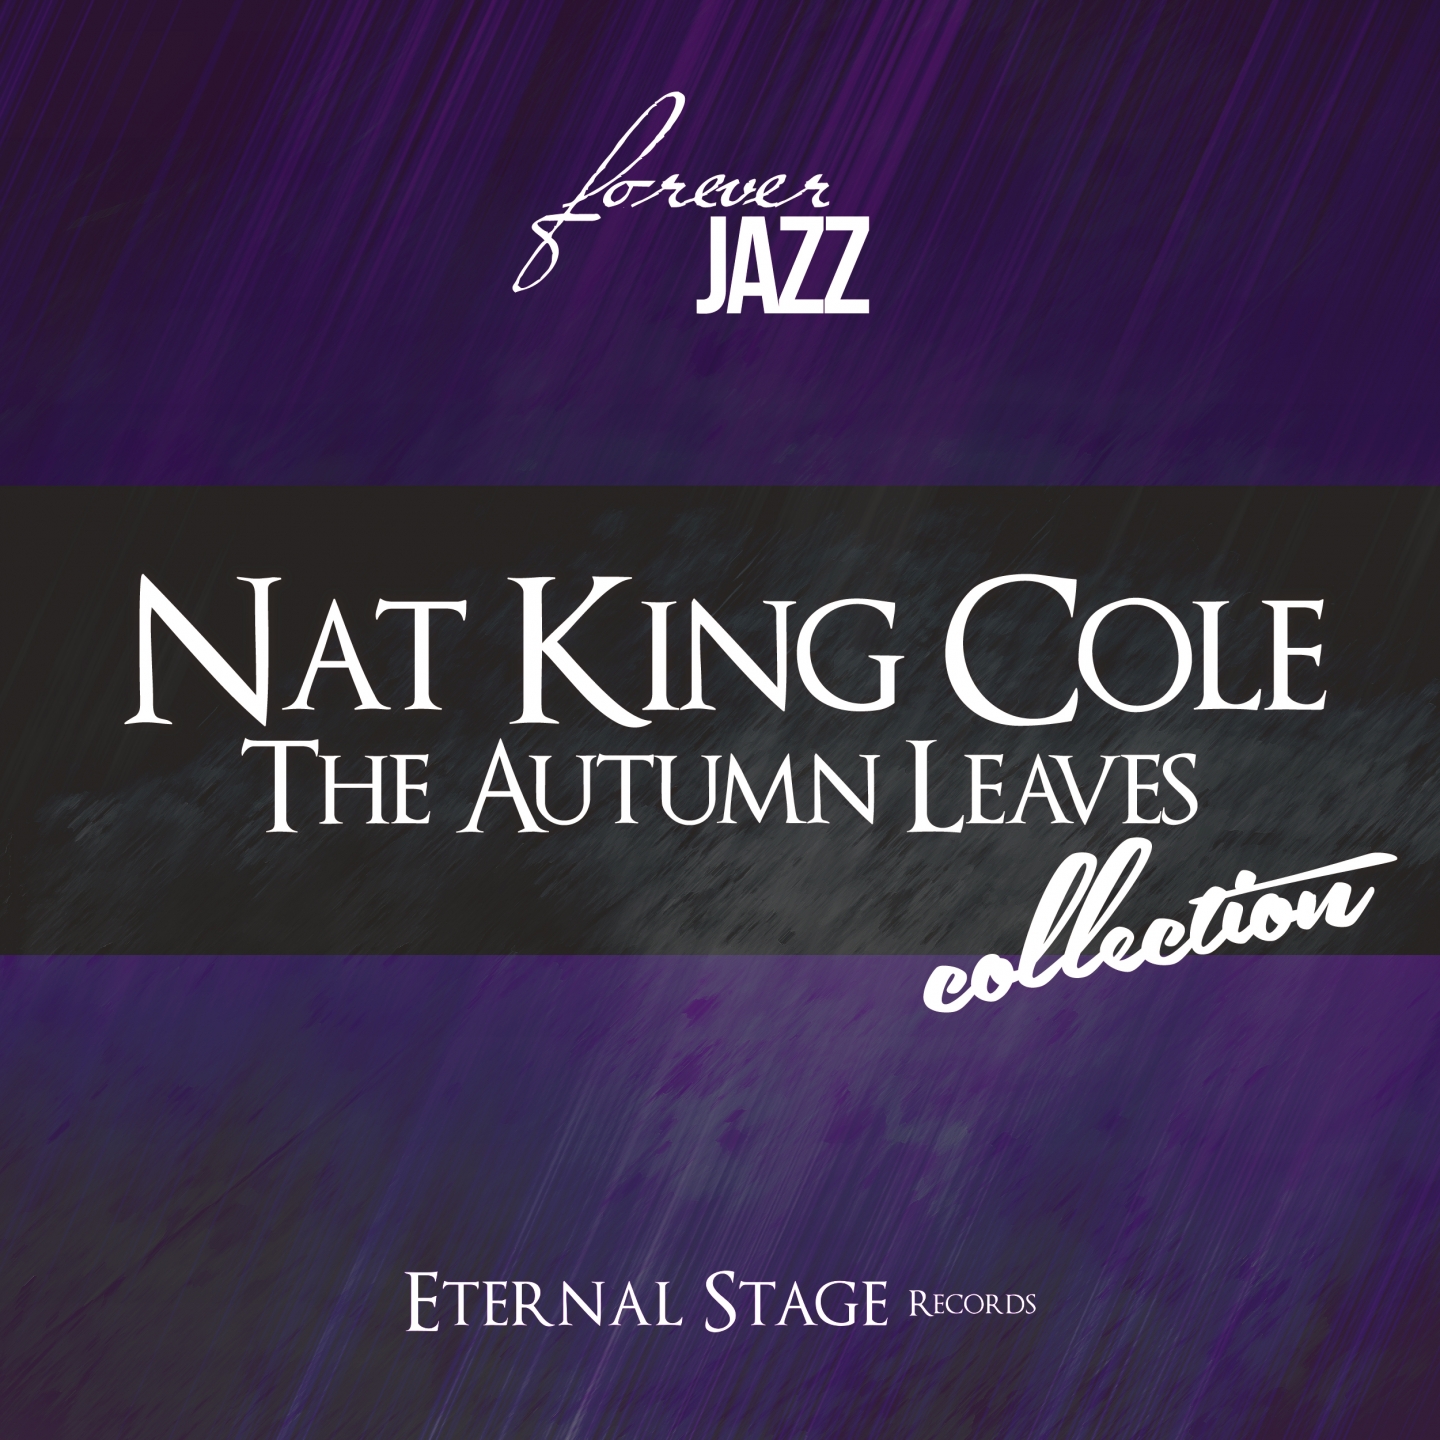 The Autumn Leaves Collection (Forever Jazz)